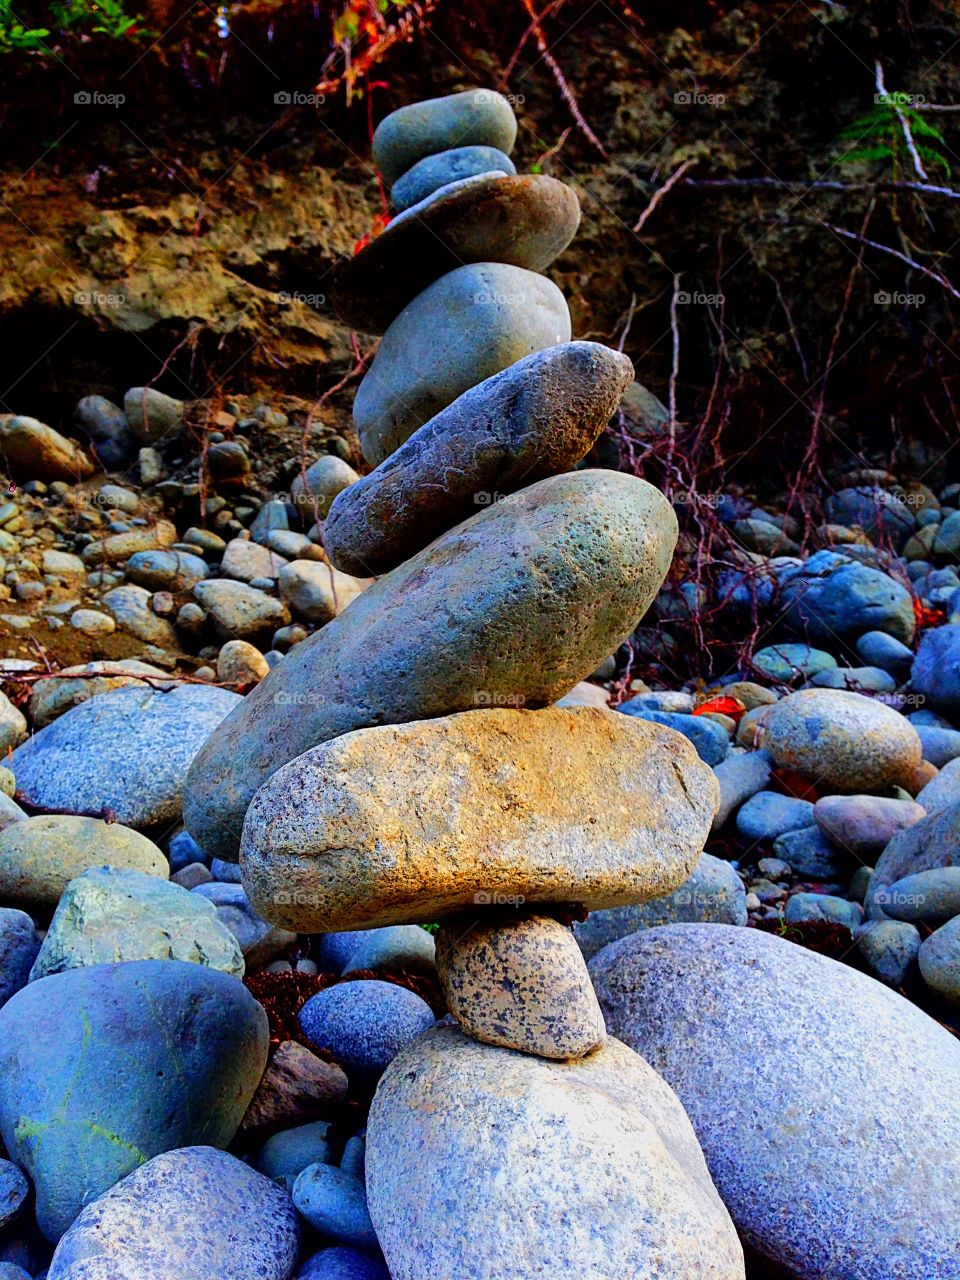 Some rocks I stacked up in the Cowichan Valley, BC.